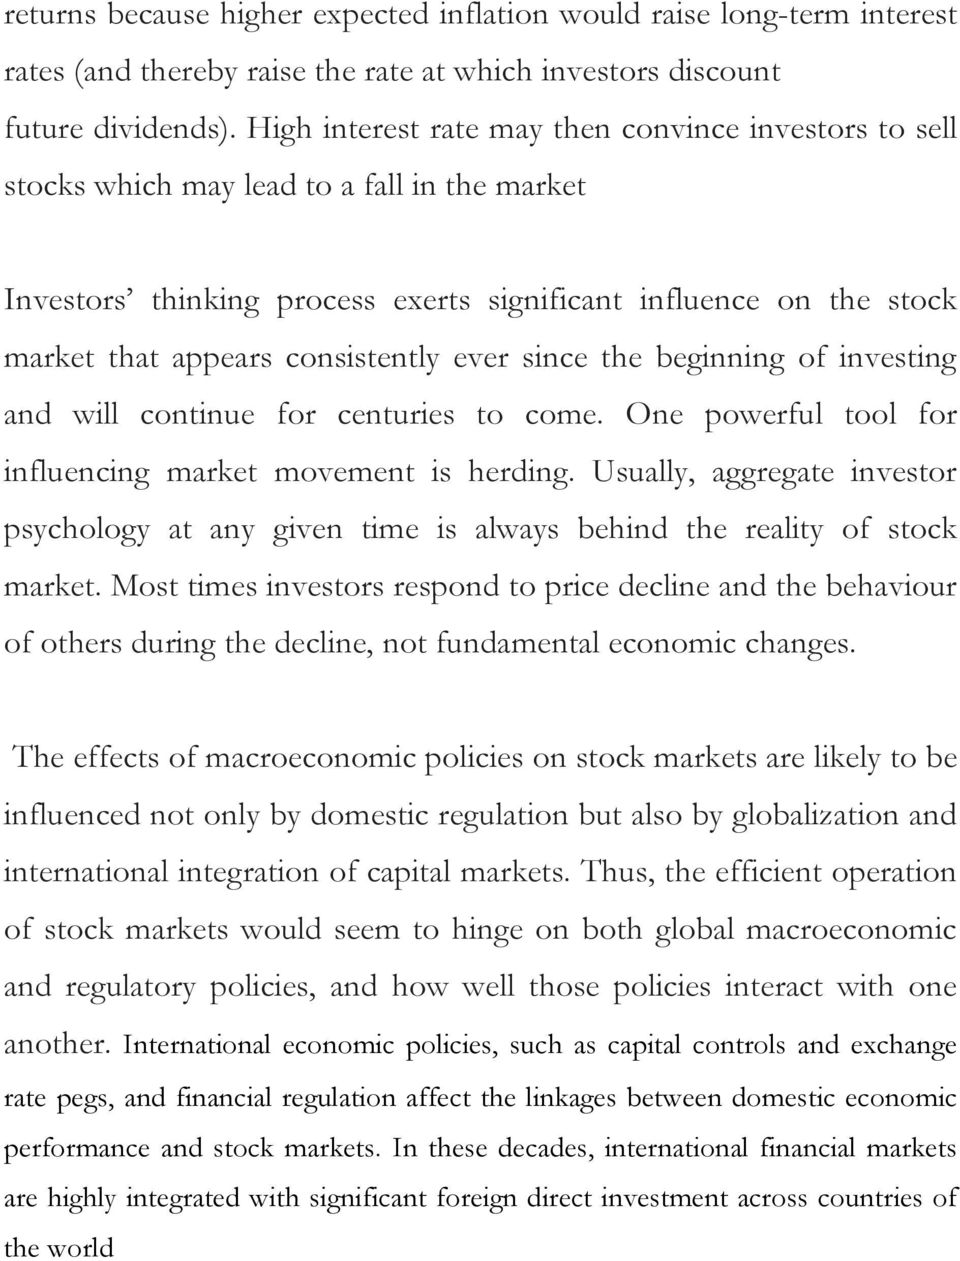 consistently ever since the beginning of investing and will continue for centuries to come. One powerful tool for influencing market movement is herding.